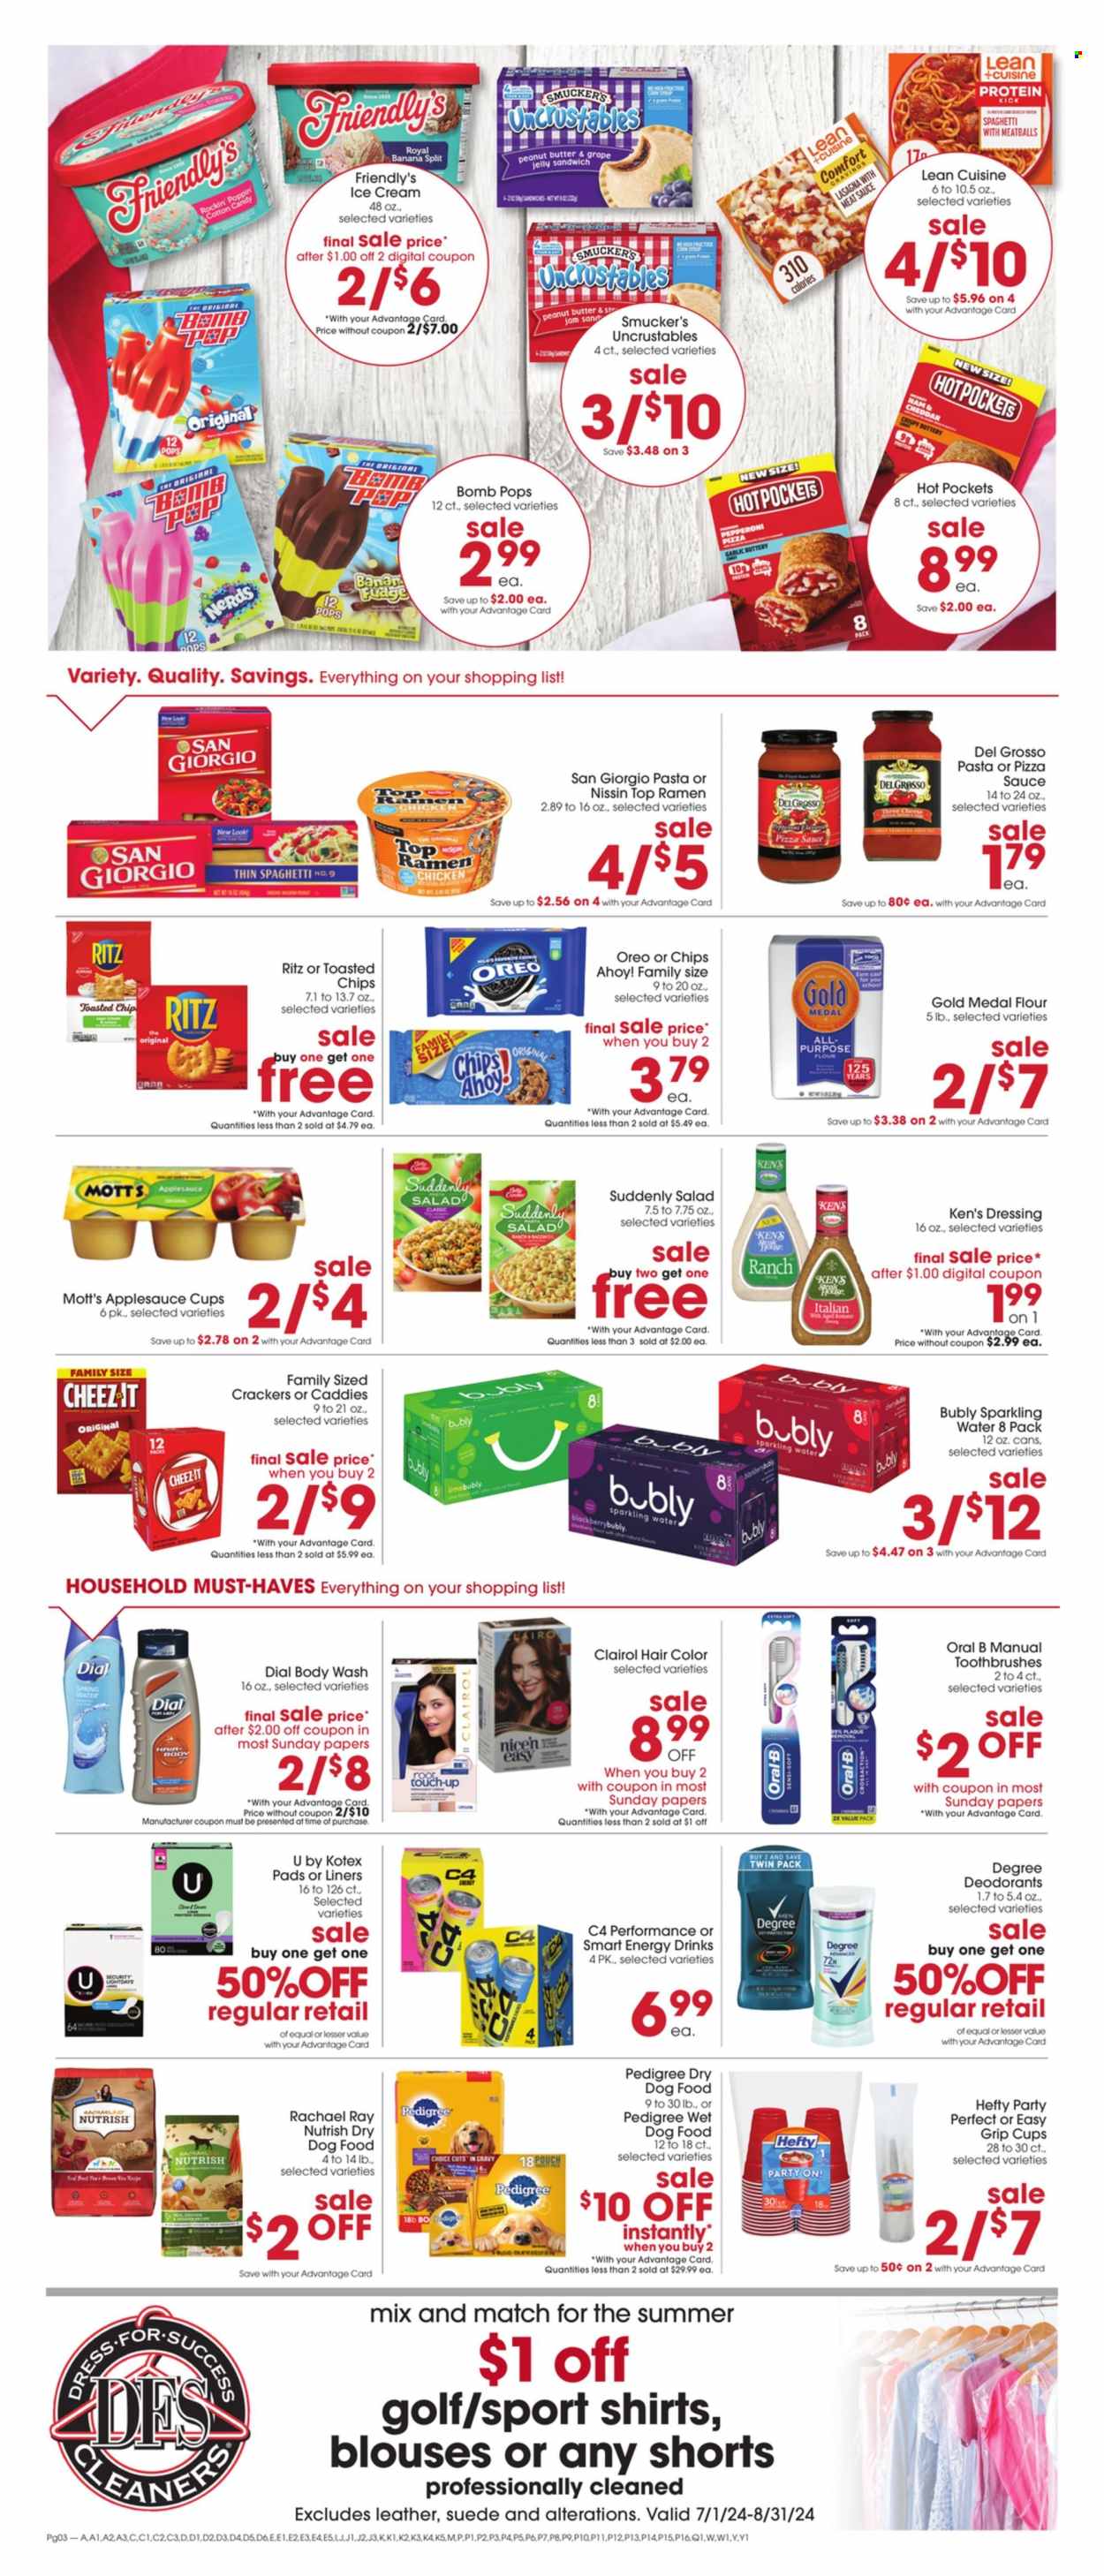 thumbnail - Giant Eagle Flyer - 07/04/2024 - 07/10/2024 - Sales products - salad, Mott's, ramen, spaghetti, hot pocket, pasta sauce, meatballs, pasta, Top Ramen, lasagna meal, Lean Cuisine, Nissin, ready meal, Oreo, jelly, Friendly's Ice Cream, cotton candy, crackers, Chips Ahoy!, RITZ, sweets, Cheez-It, salty snack, flour, pizza sauce, dressing, apple sauce, corn syrup, grape jelly, syrup, jam, energy drink, spring water, sparkling water, water, pads, cleaner, body wash, Dial, toothbrush, Oral-B, sanitary pads, Kotex, Kotex pads, Root Touch-Up, Clairol, hair color, deodorant, Degree, Hefty, plastic cup, animal food, dog food, wet dog food, Pedigree, dry dog food, Nutrish, vitamin D3. Page 3.